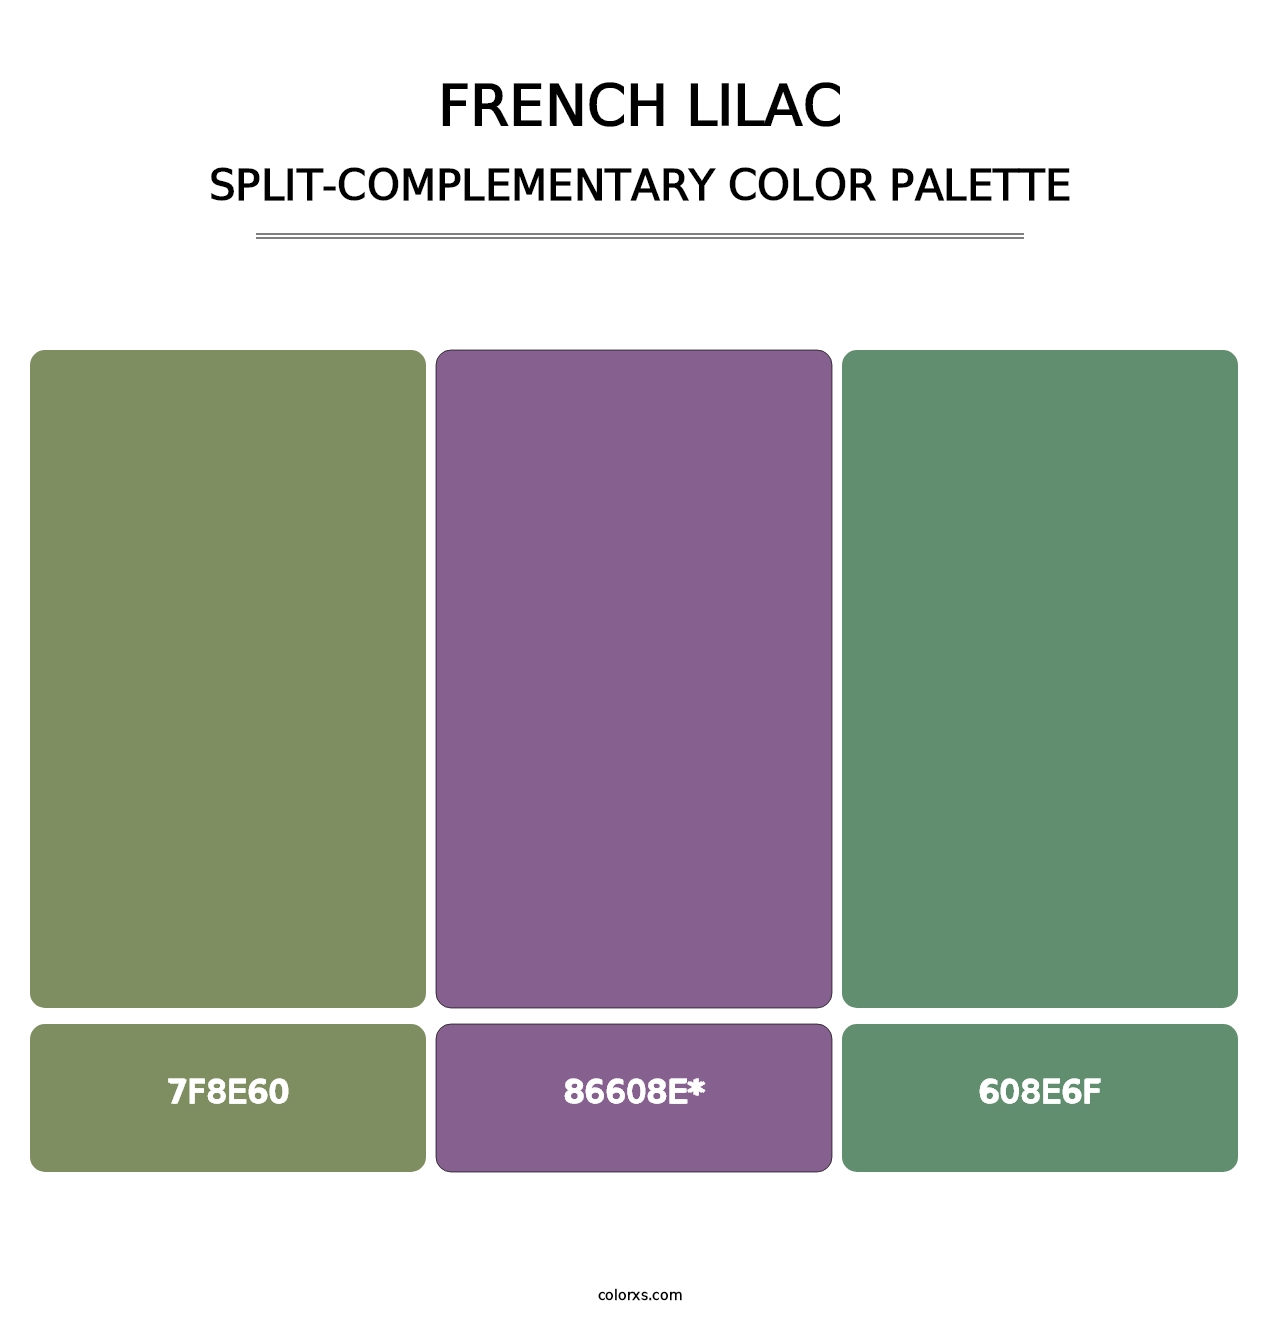 French Lilac - Split-Complementary Color Palette